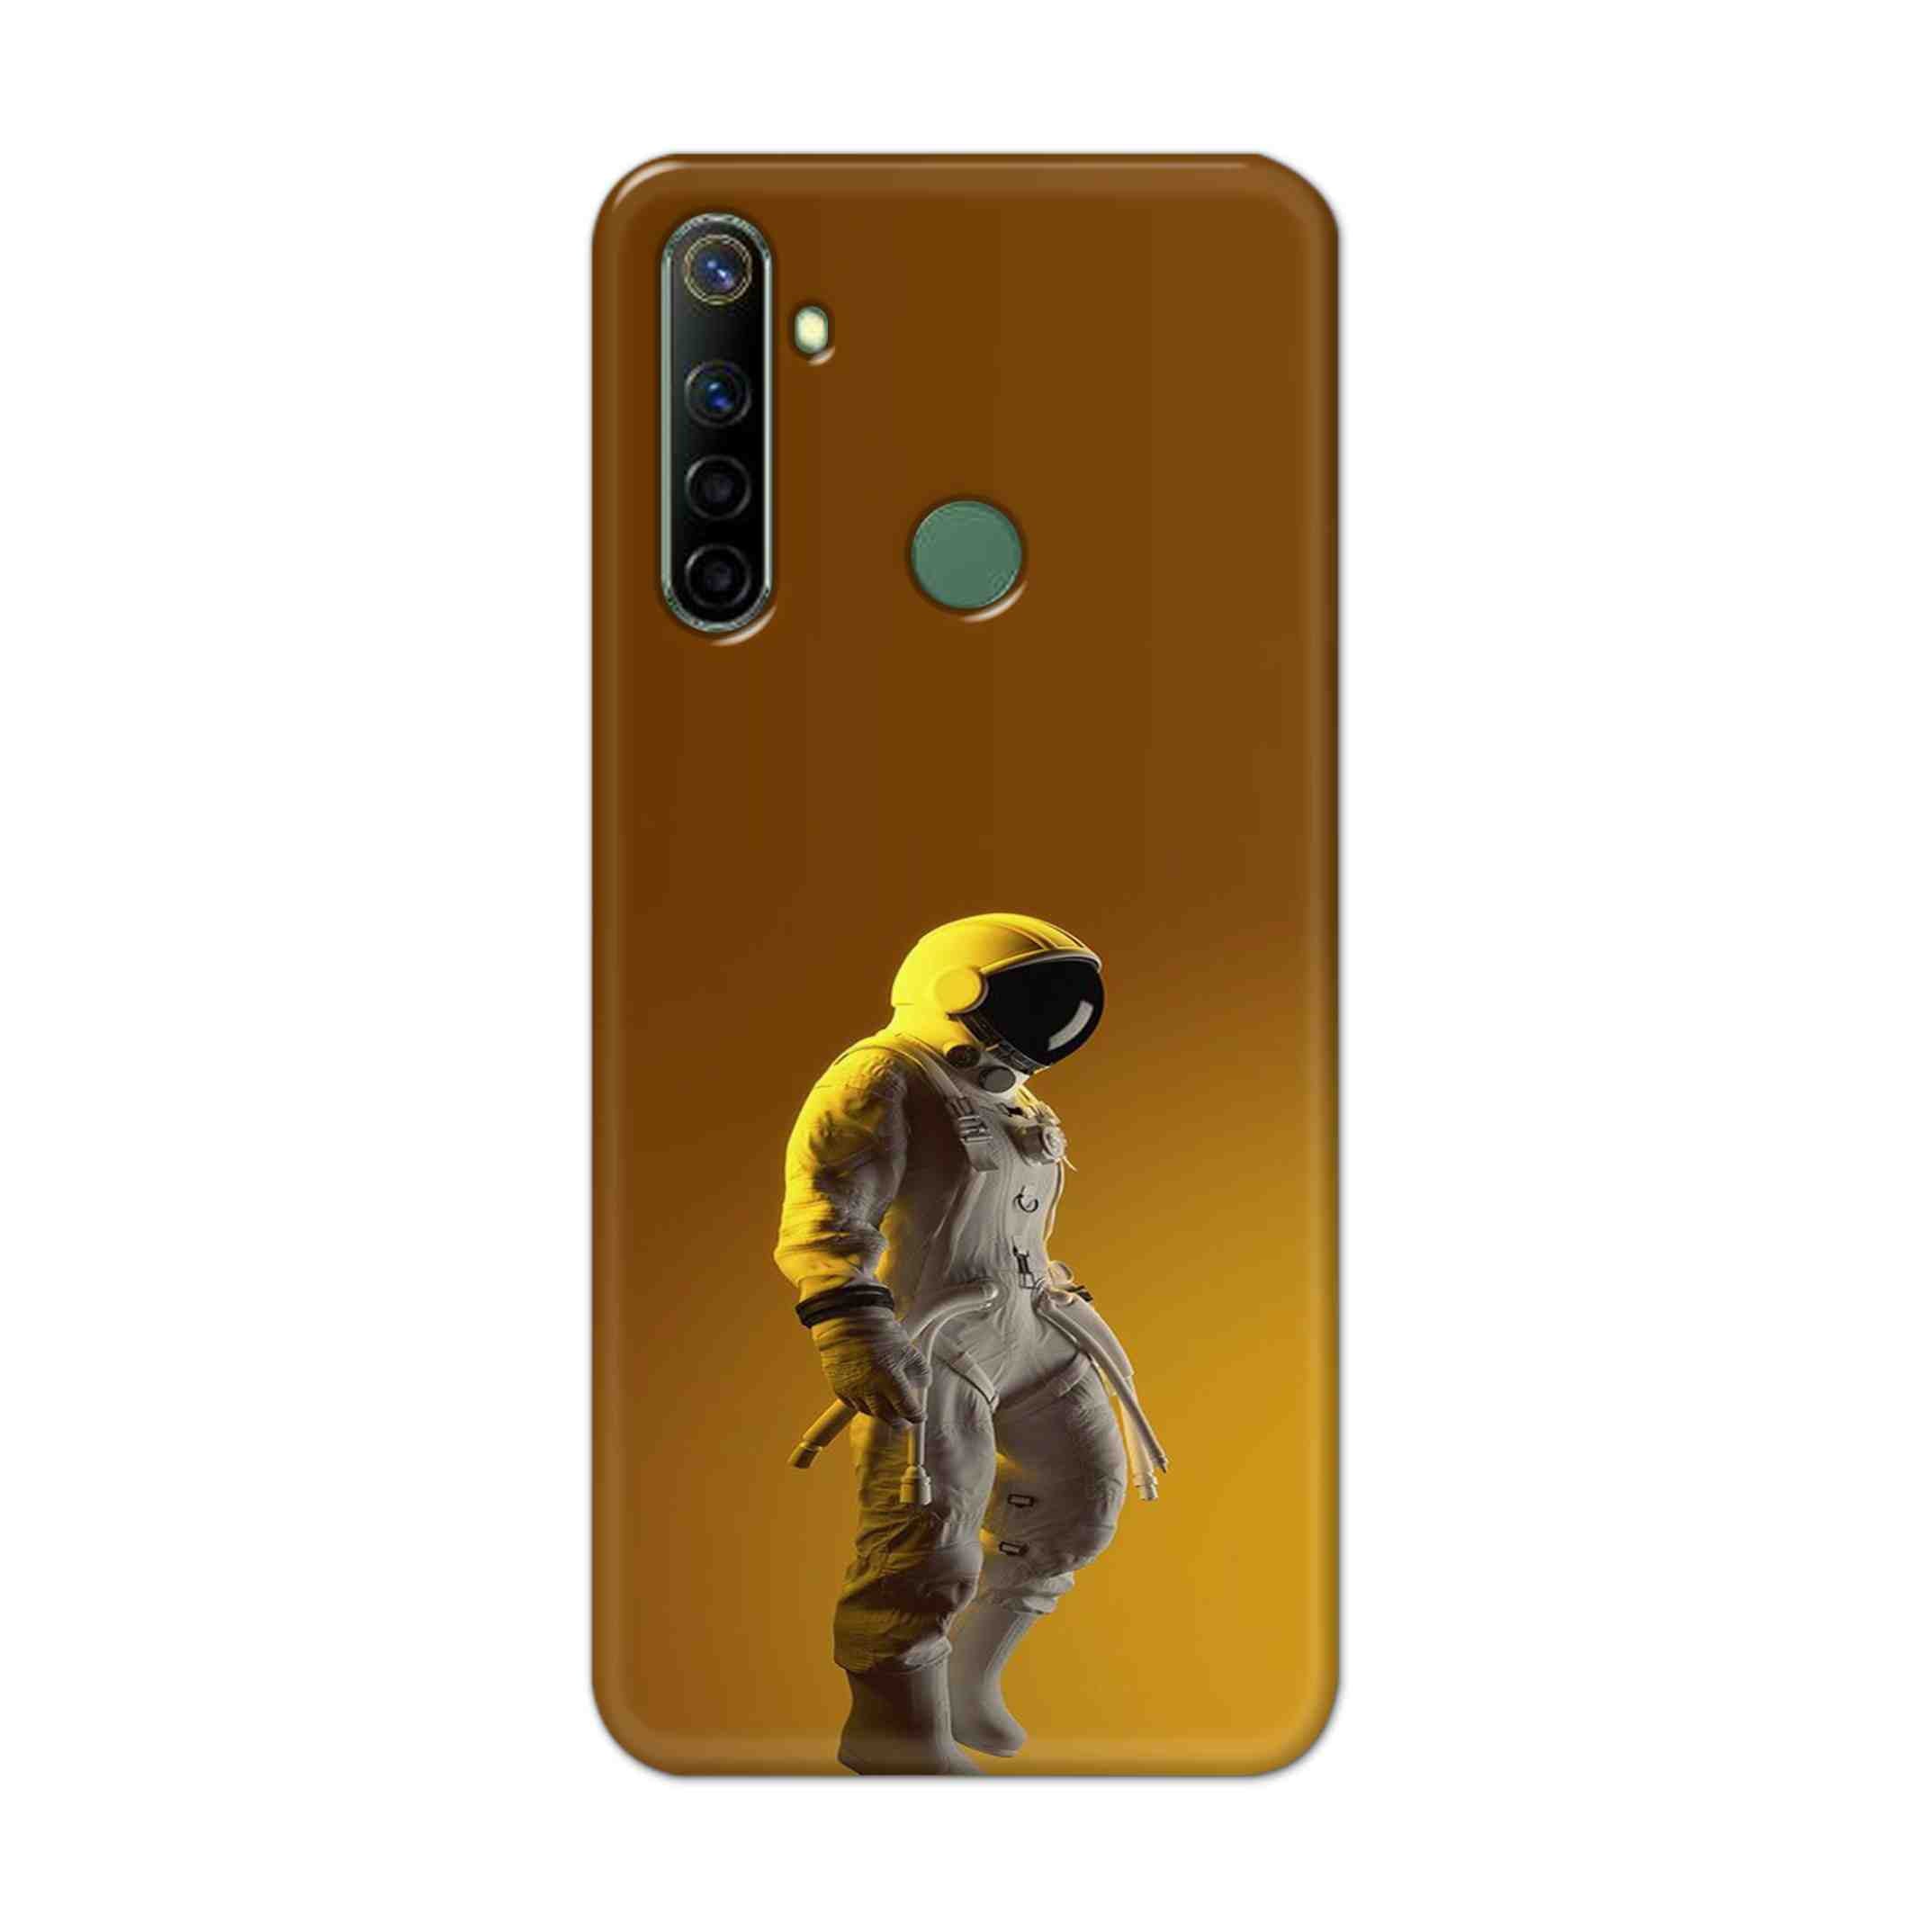 Buy Yellow Astronaut Hard Back Mobile Phone Case Cover For Realme Narzo 10a Online